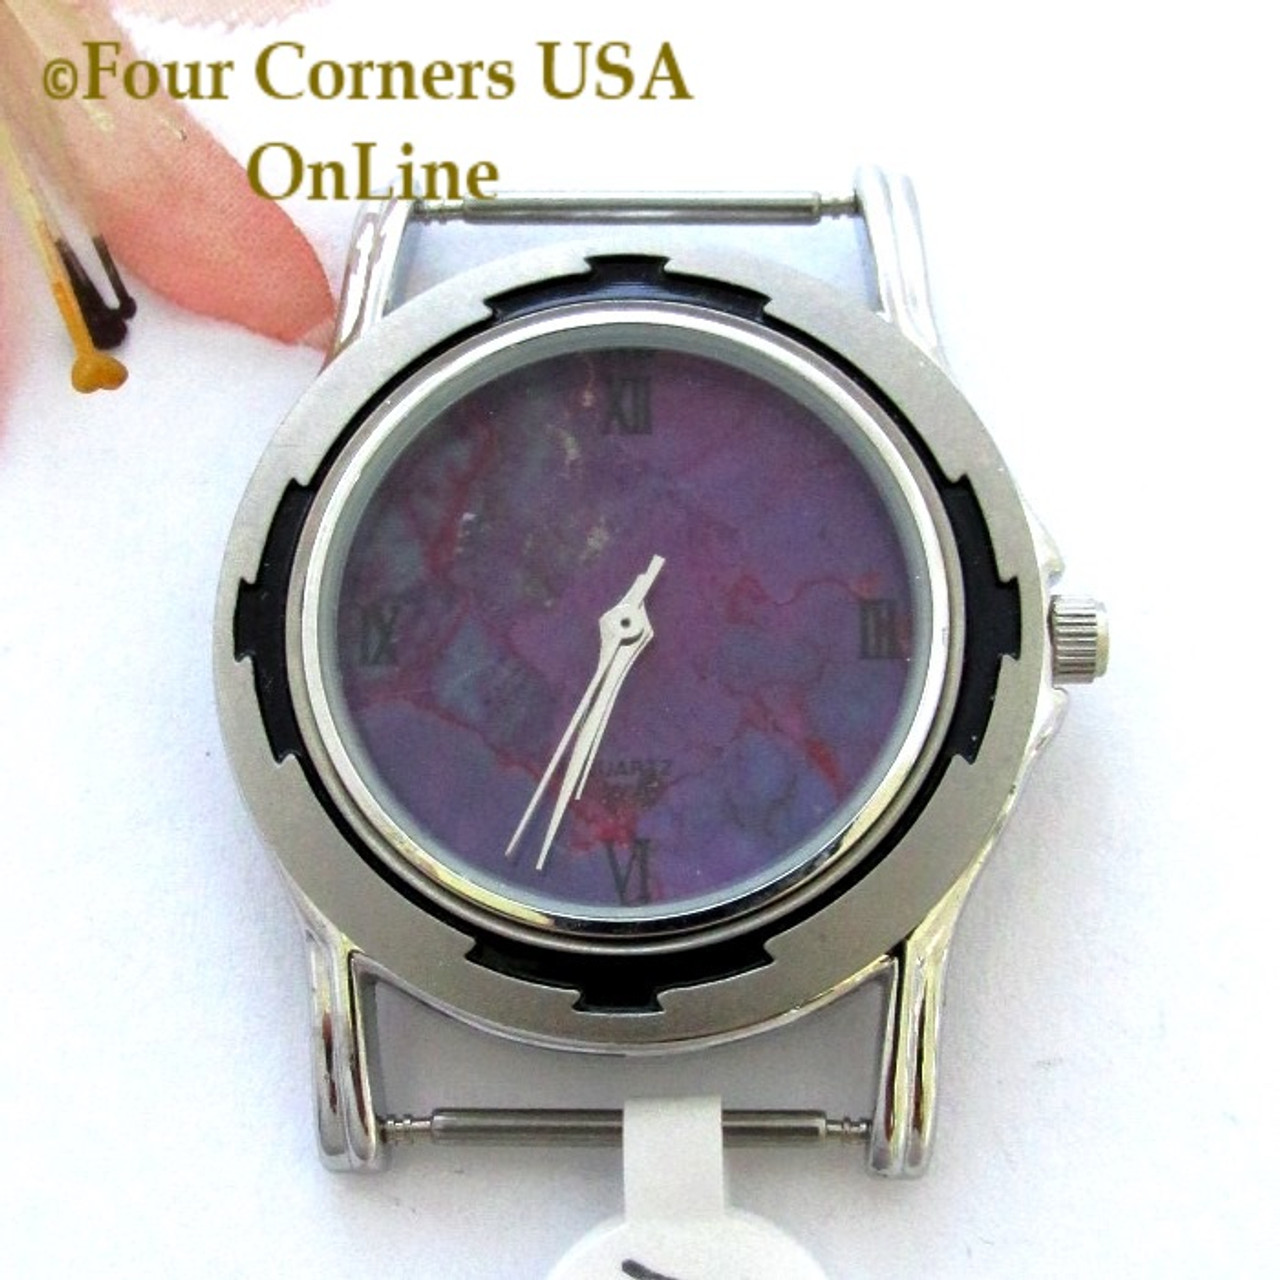 Pin on Men's watches and accessories